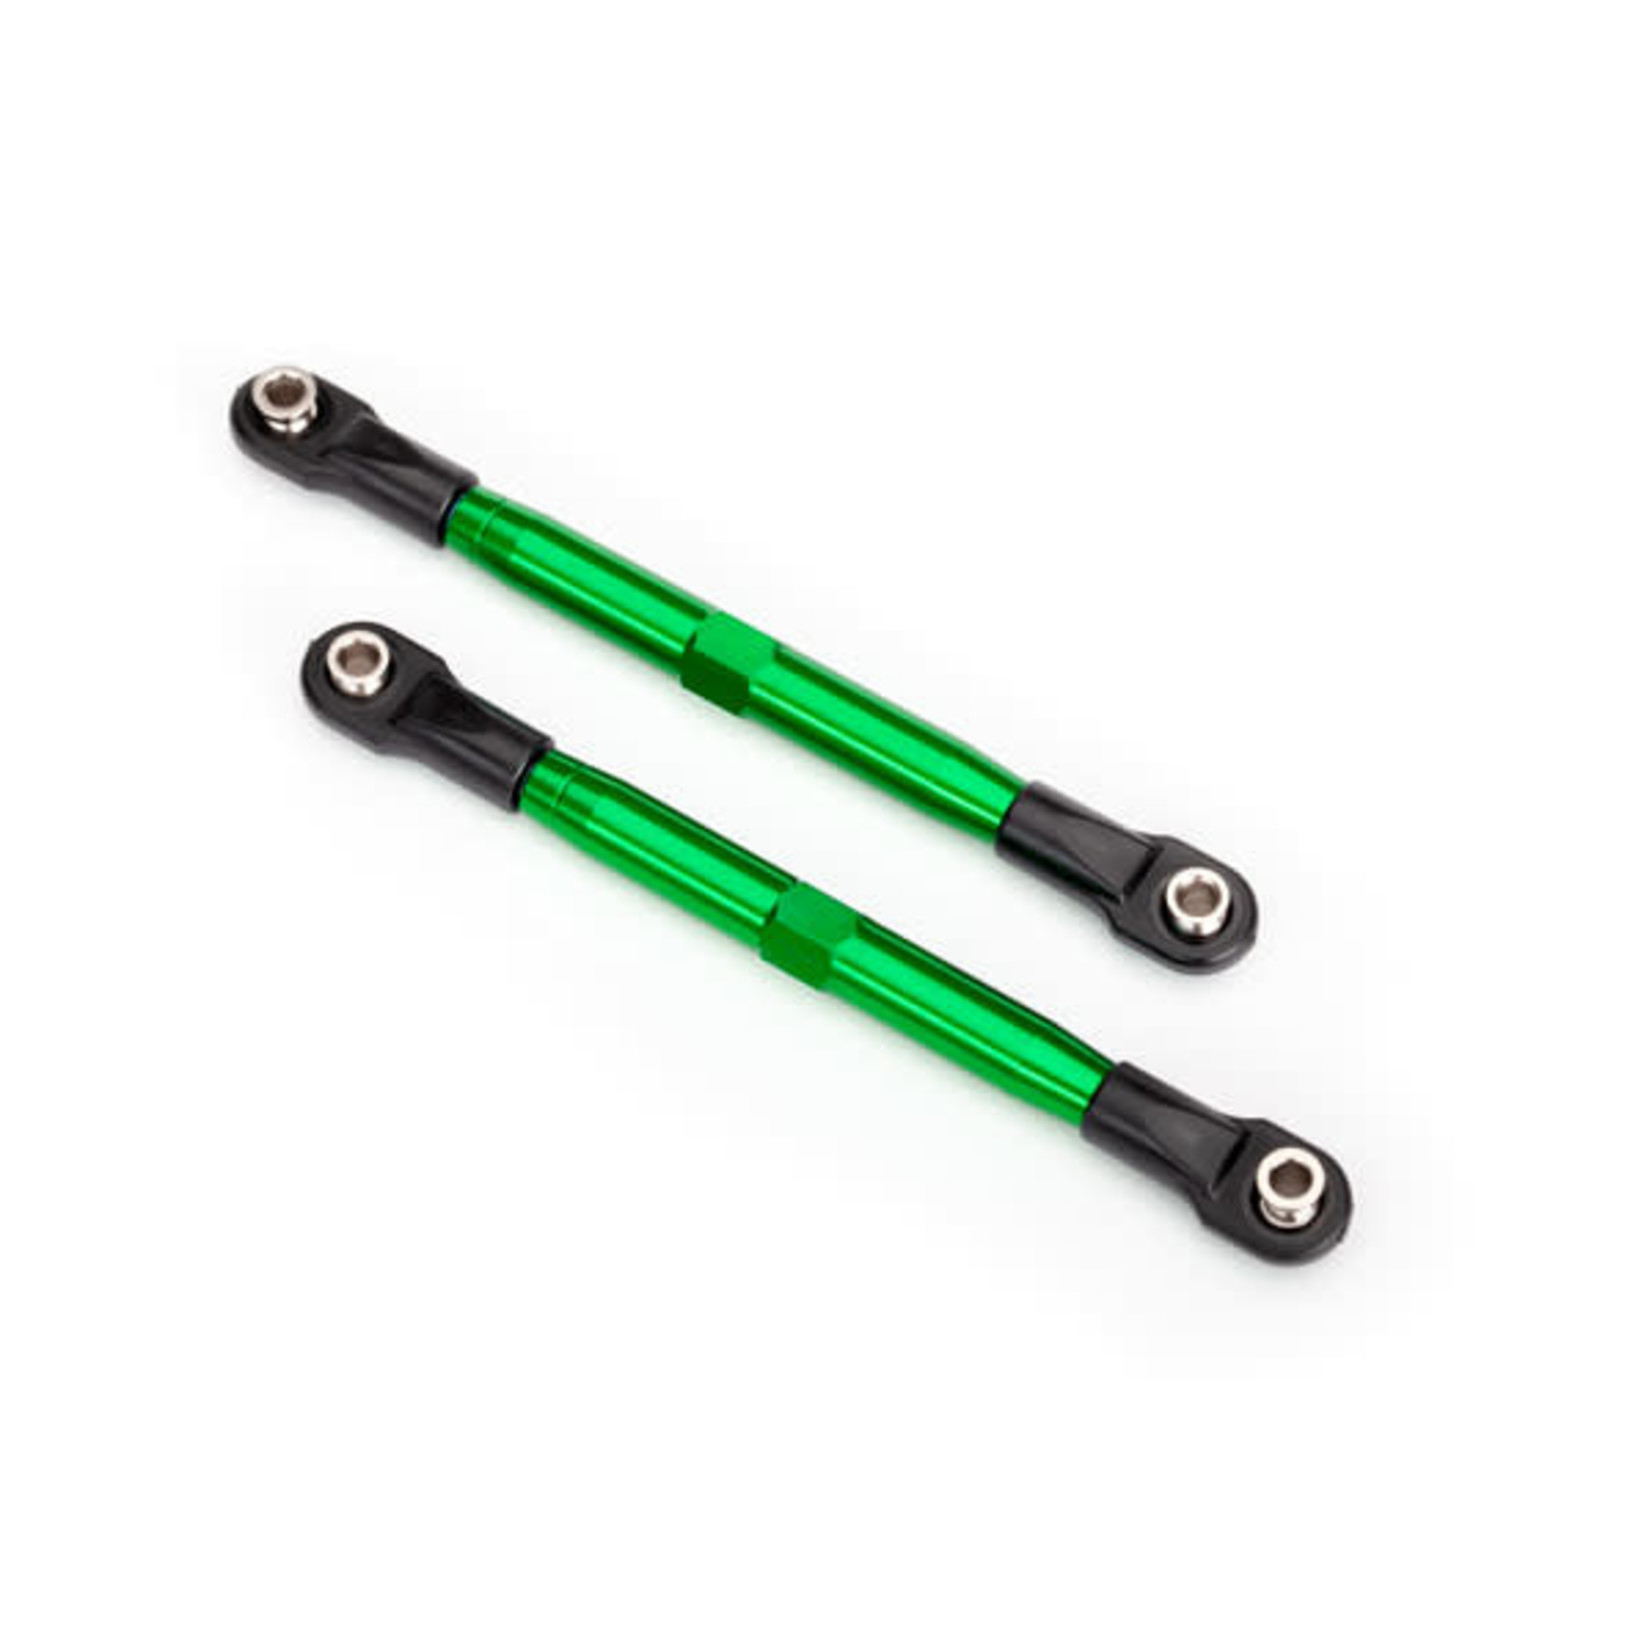 TRAXXAS Toe links (TUBES green-anodized, 7075-T6 aluminum, stronger than titanium) (87mm) (2)/ rod ends (4)/ aluminum wrench (1)